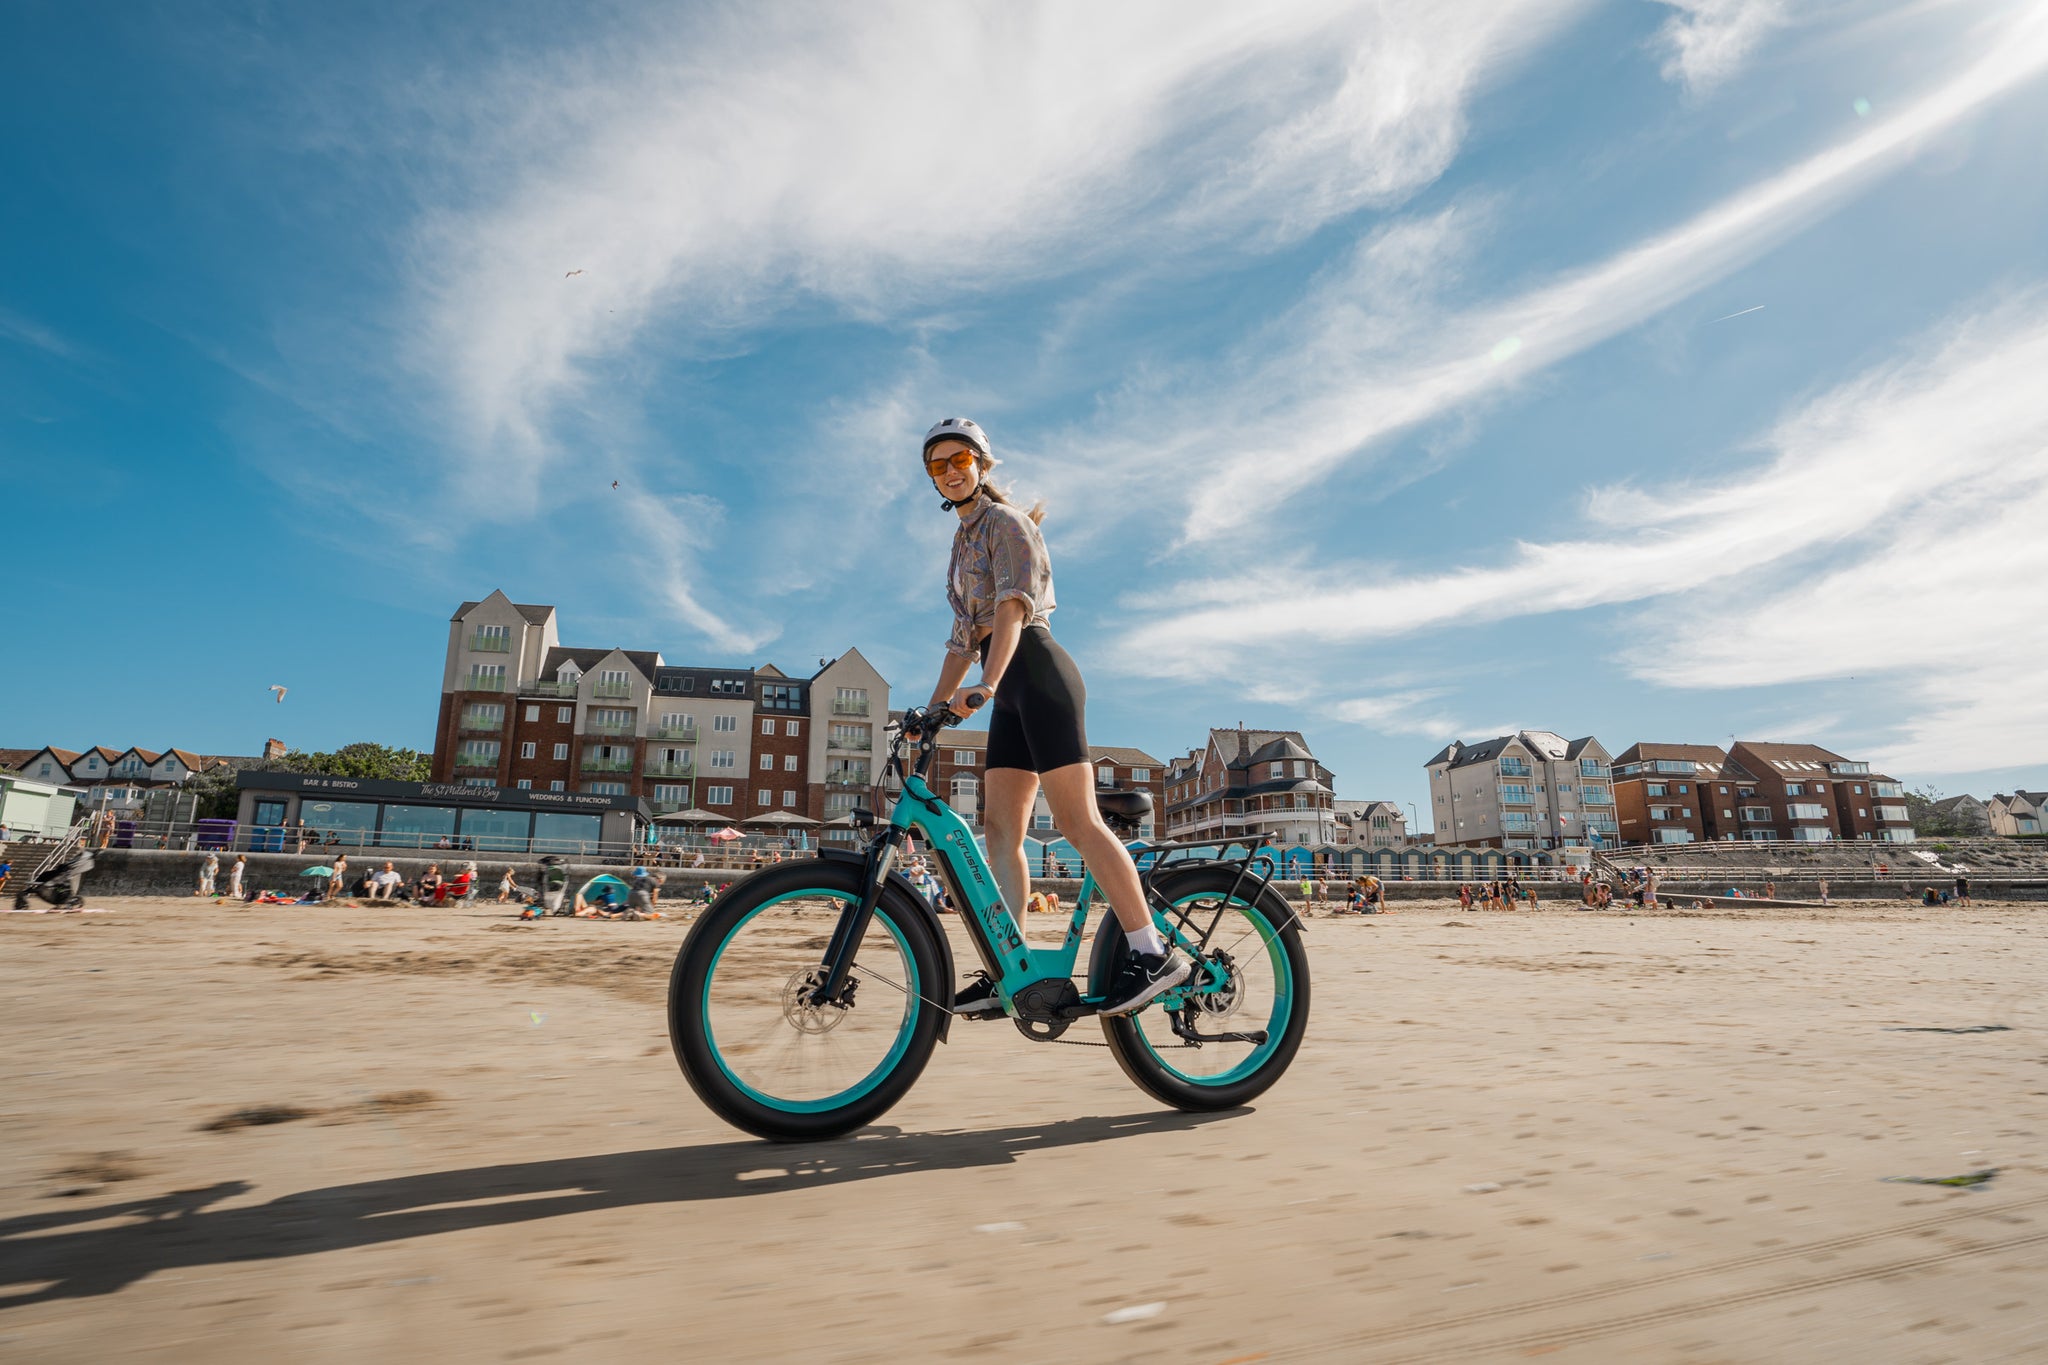 Cyrusher Anniversary Celebration: Eight Years of Growth for an Electric Bike Brand